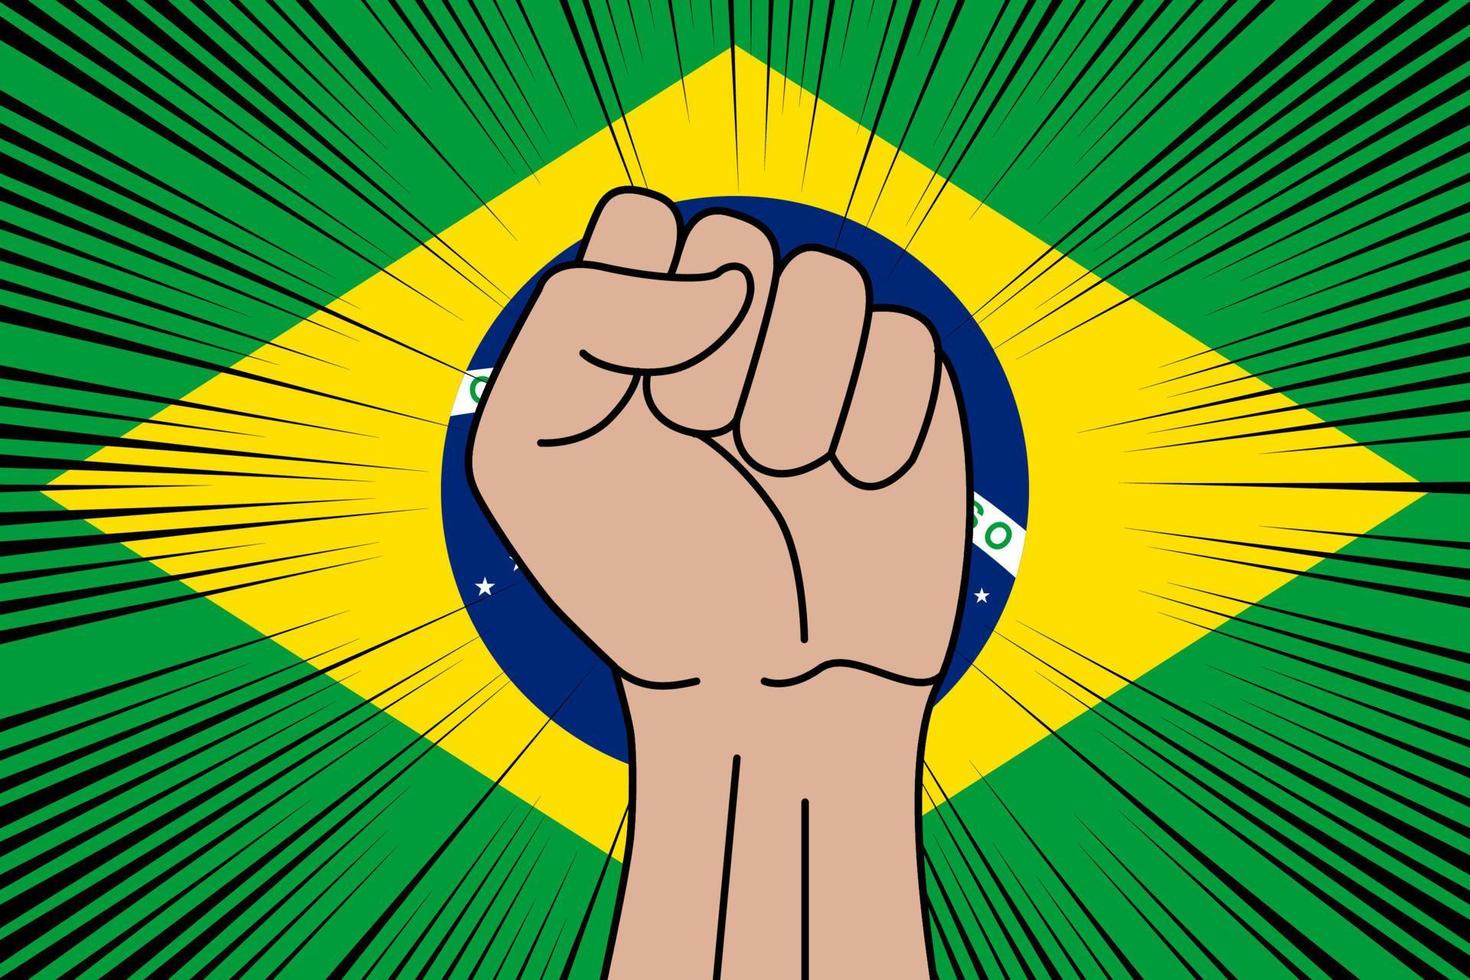 Human fist clenched symbol on flag of Brazil vector